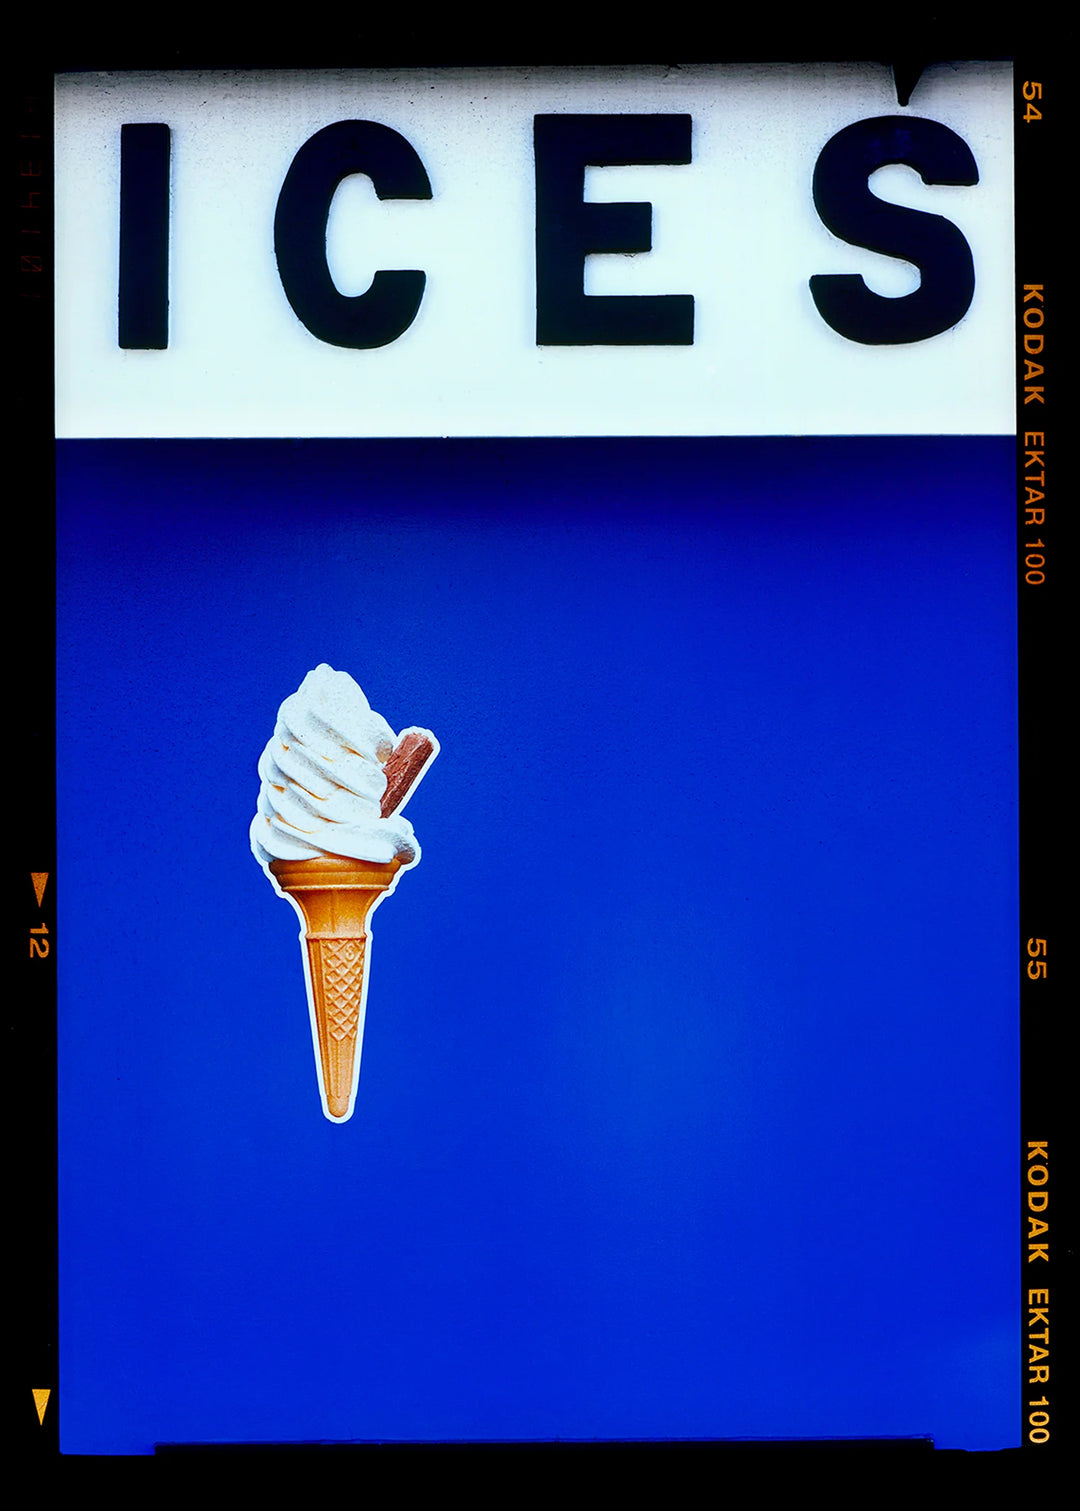 Ices Blue from Richard Heeps